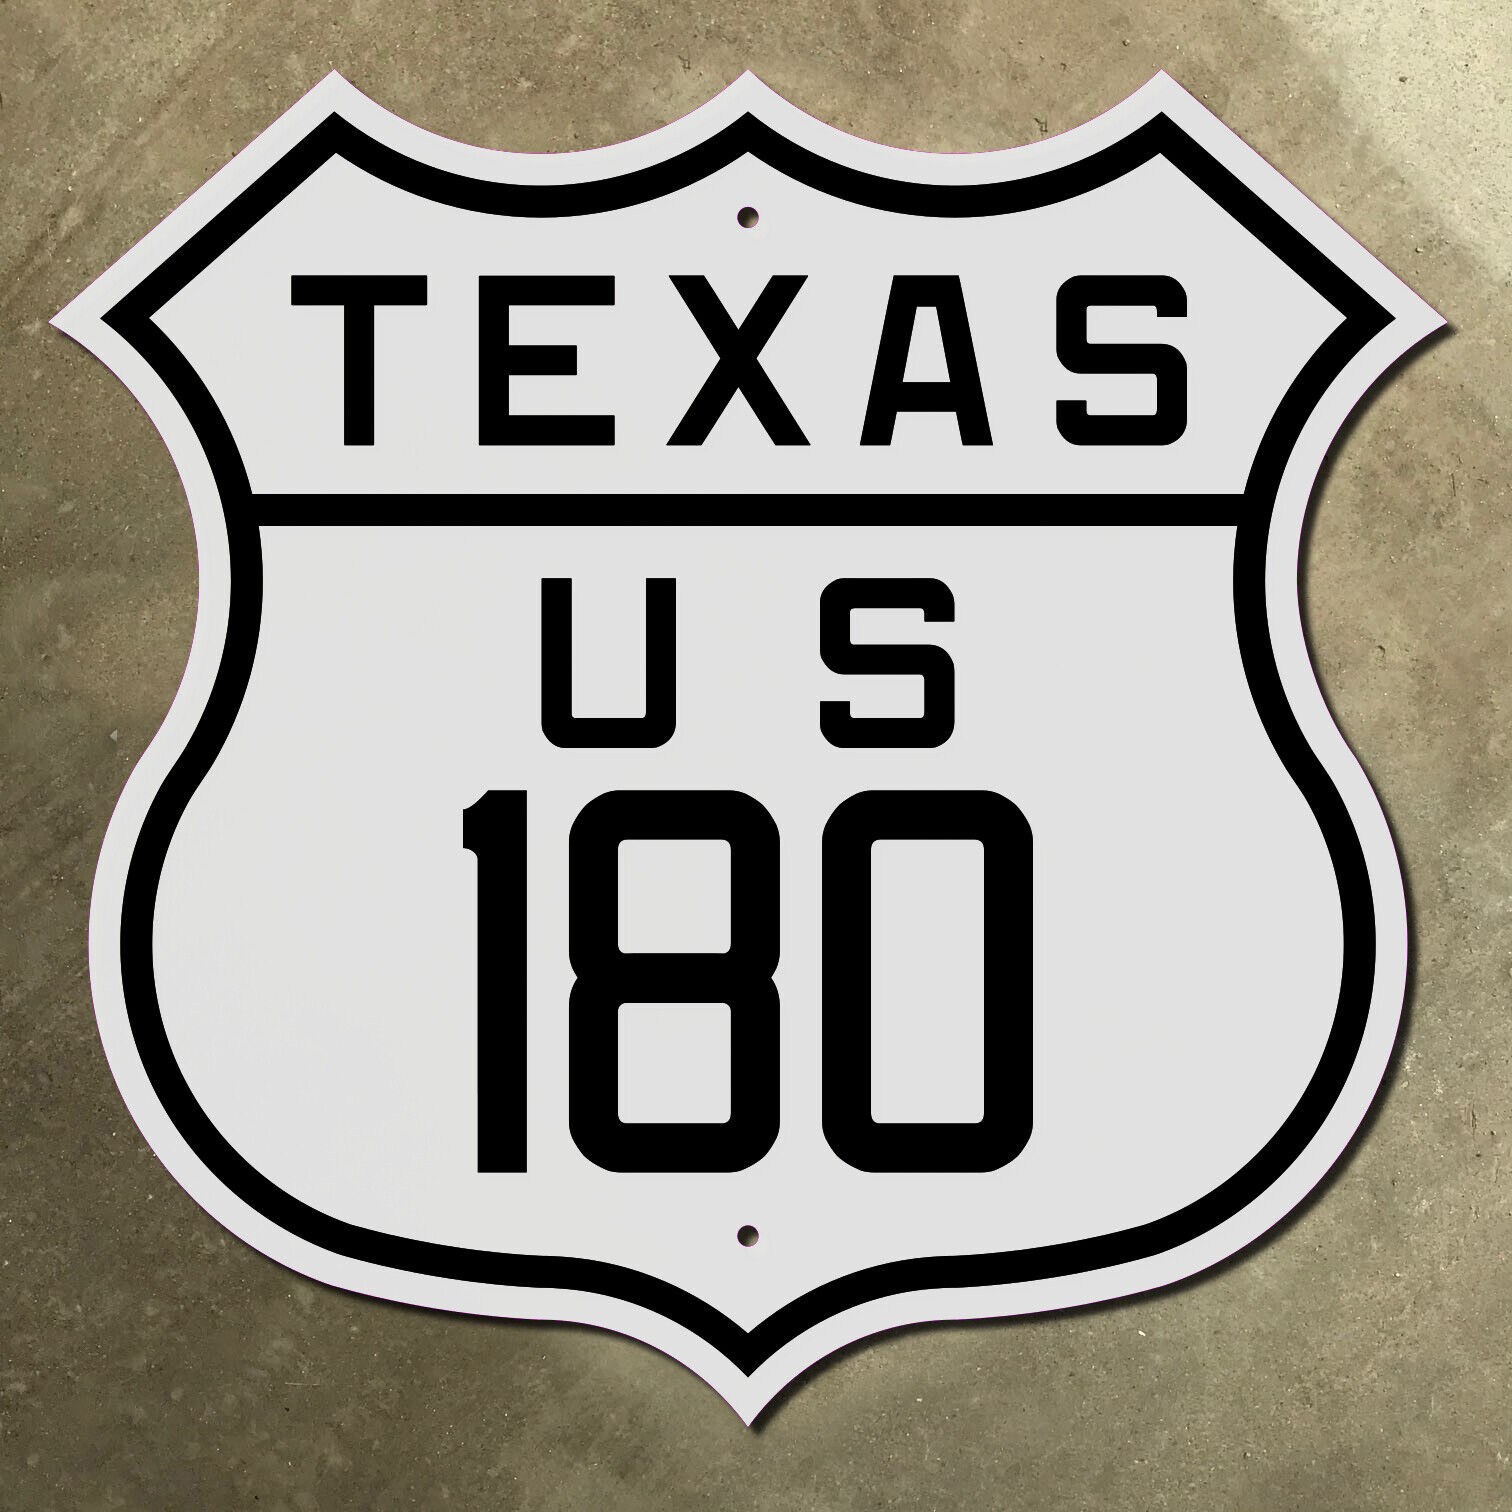 Texas US highway 180 El Paso Snyder Fort Worth route shield 1926 road sign 12x12